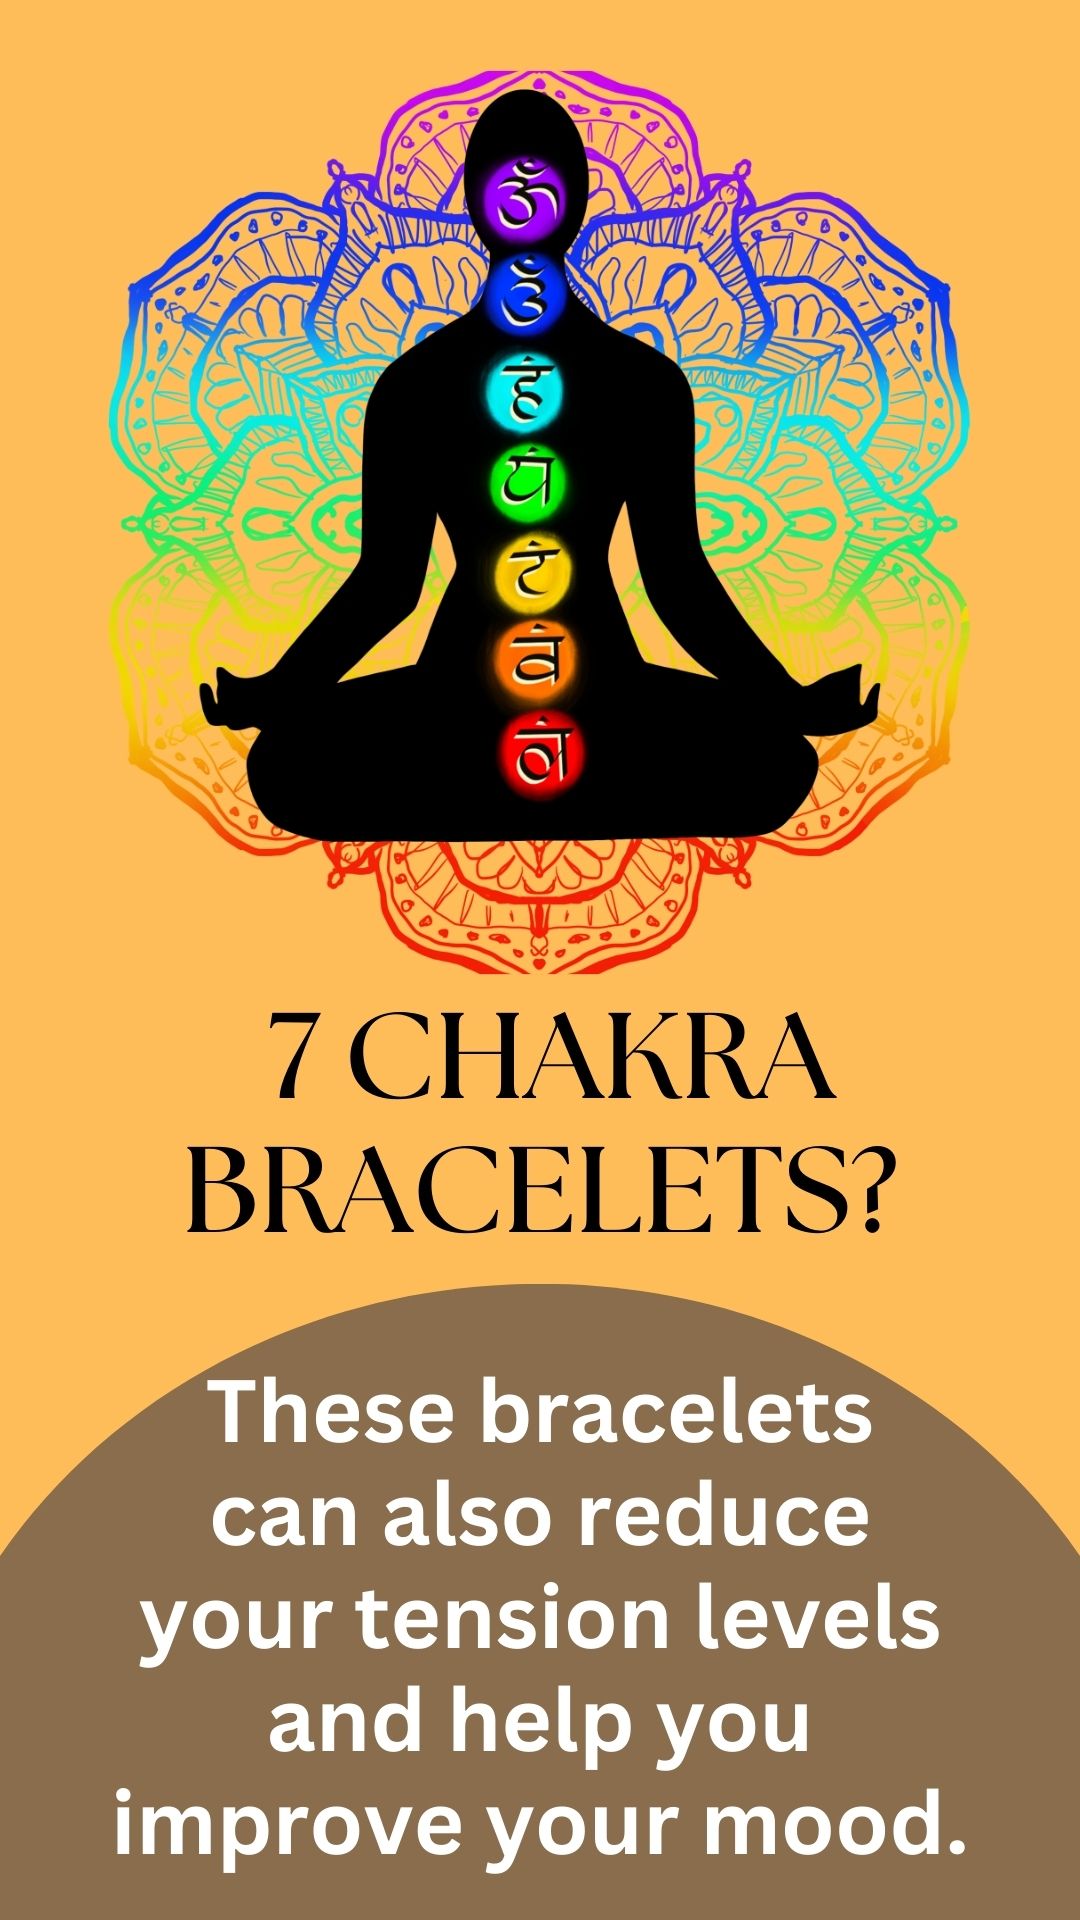 7 chakra bracelet benefits and how to wear it? - All India Institute of  Occult Science